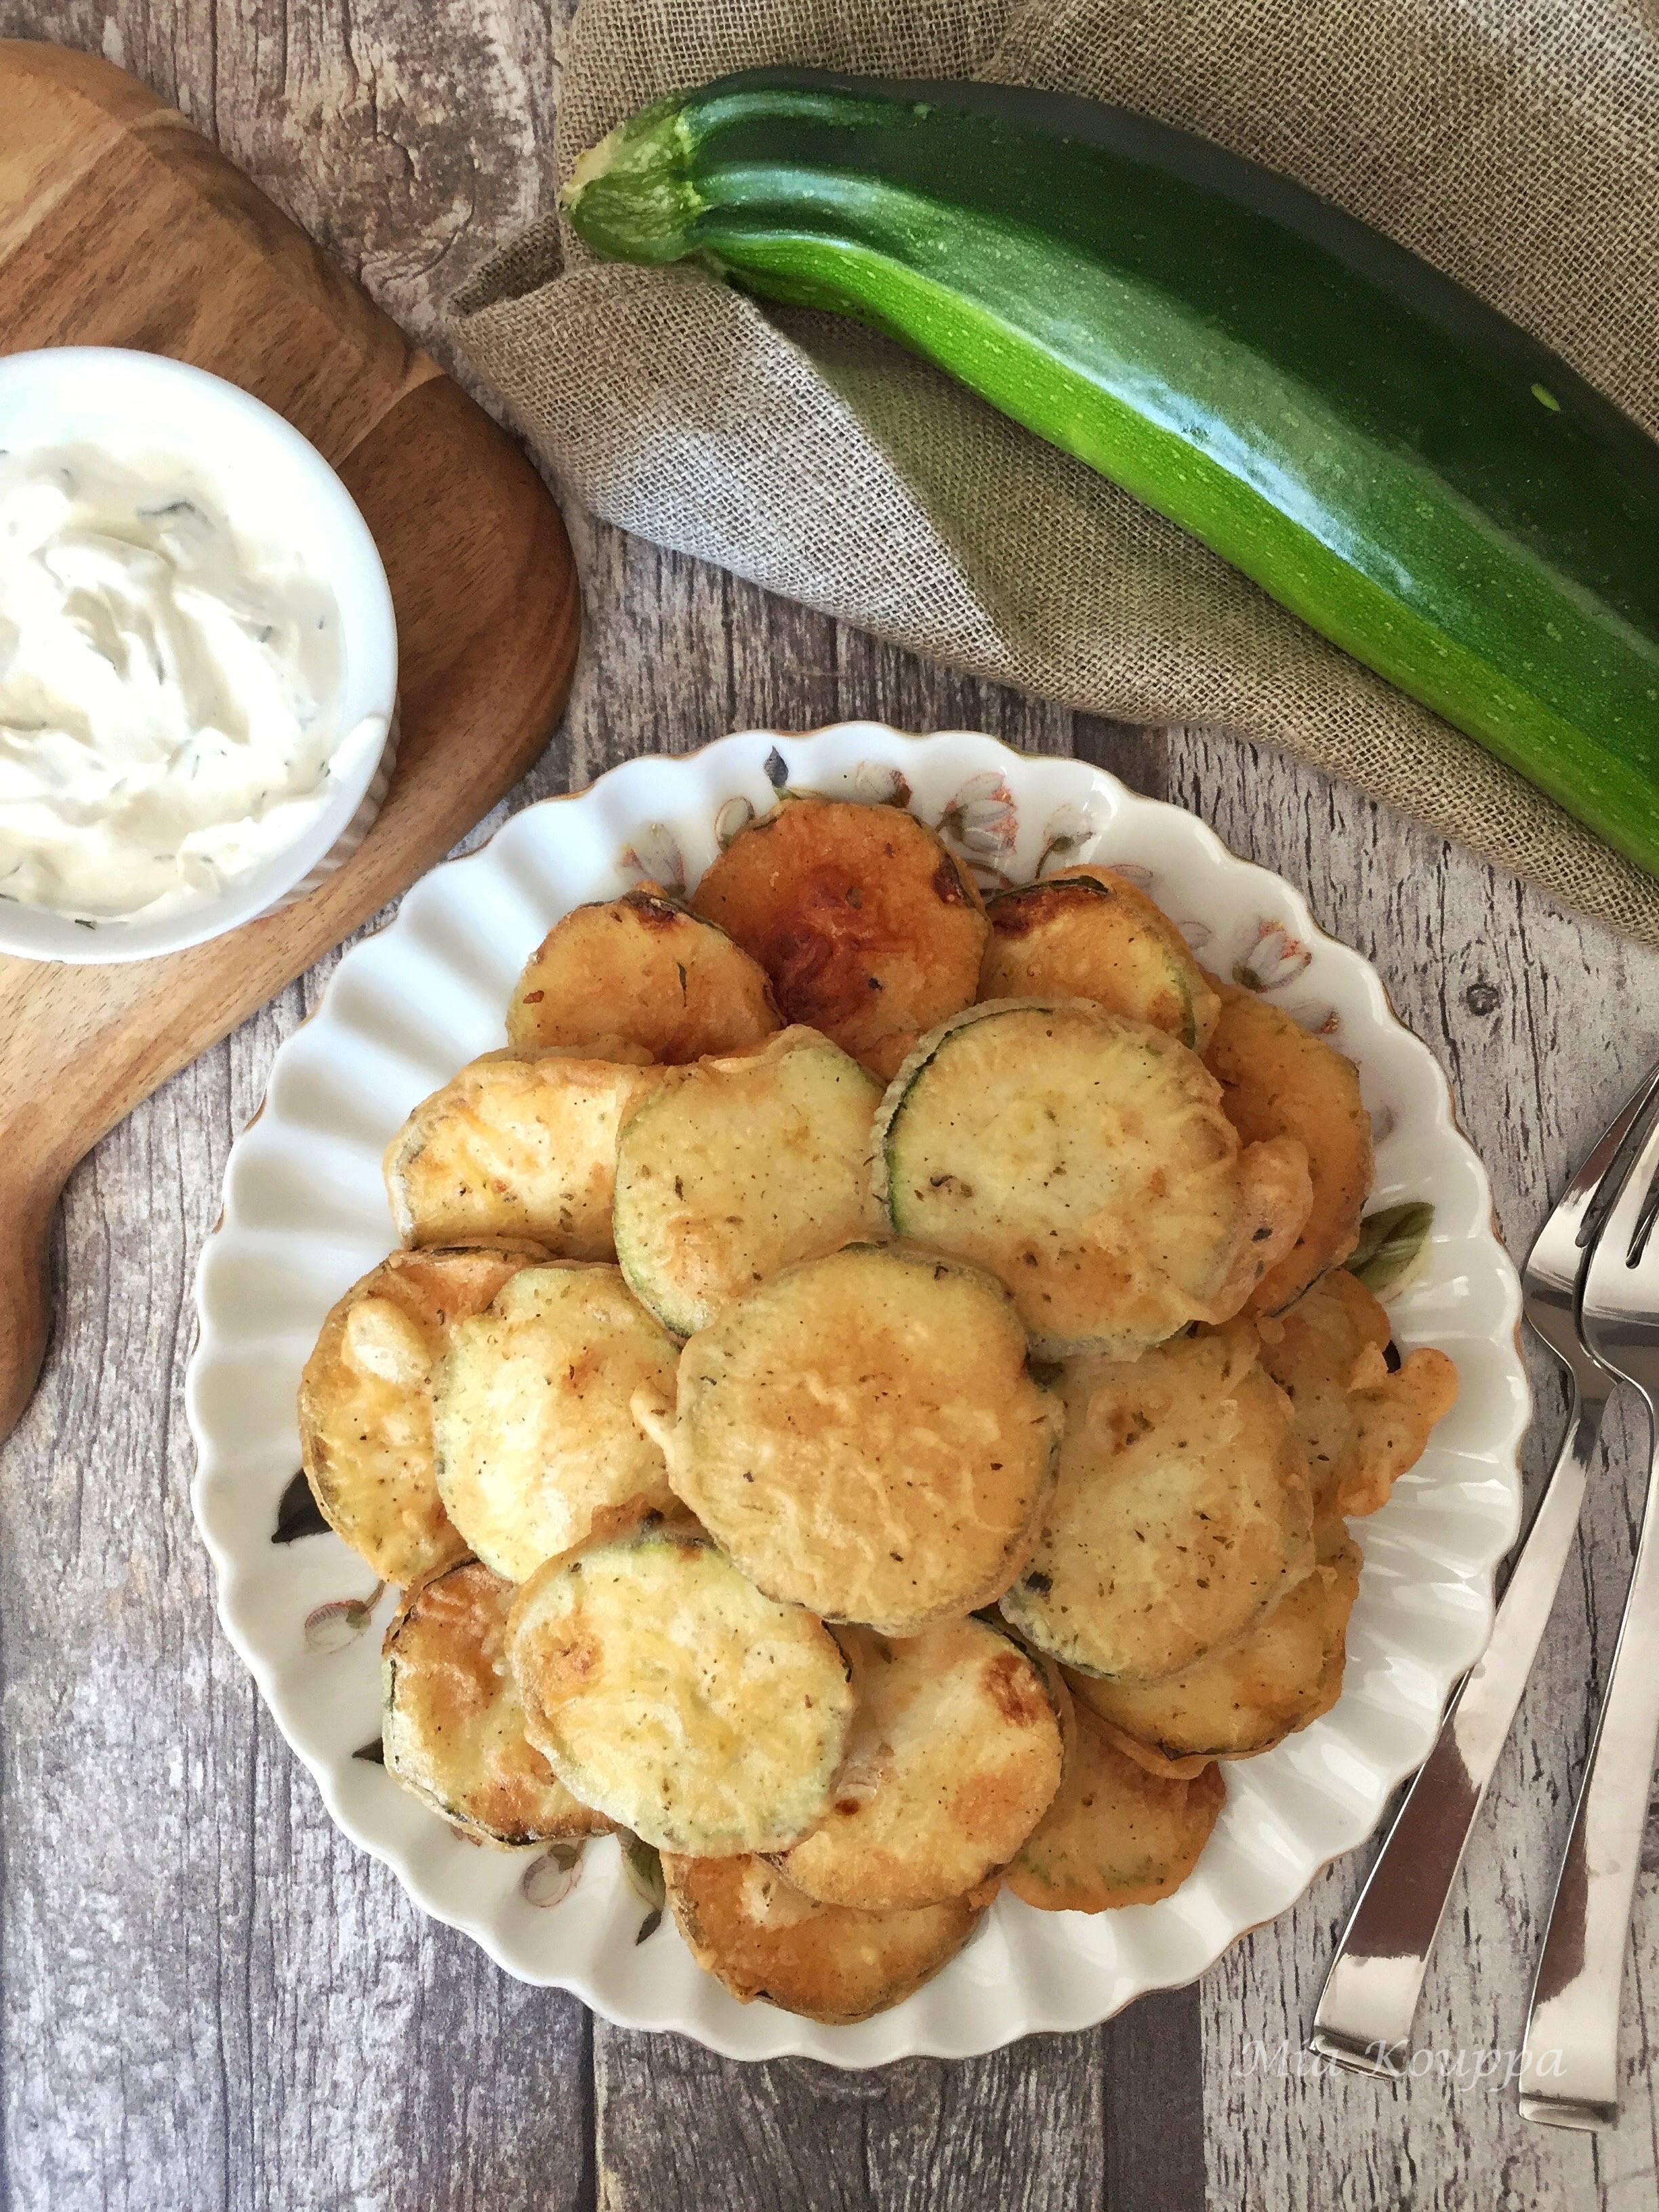 Greek fried zucchini chips. A delicious and easy recipe!